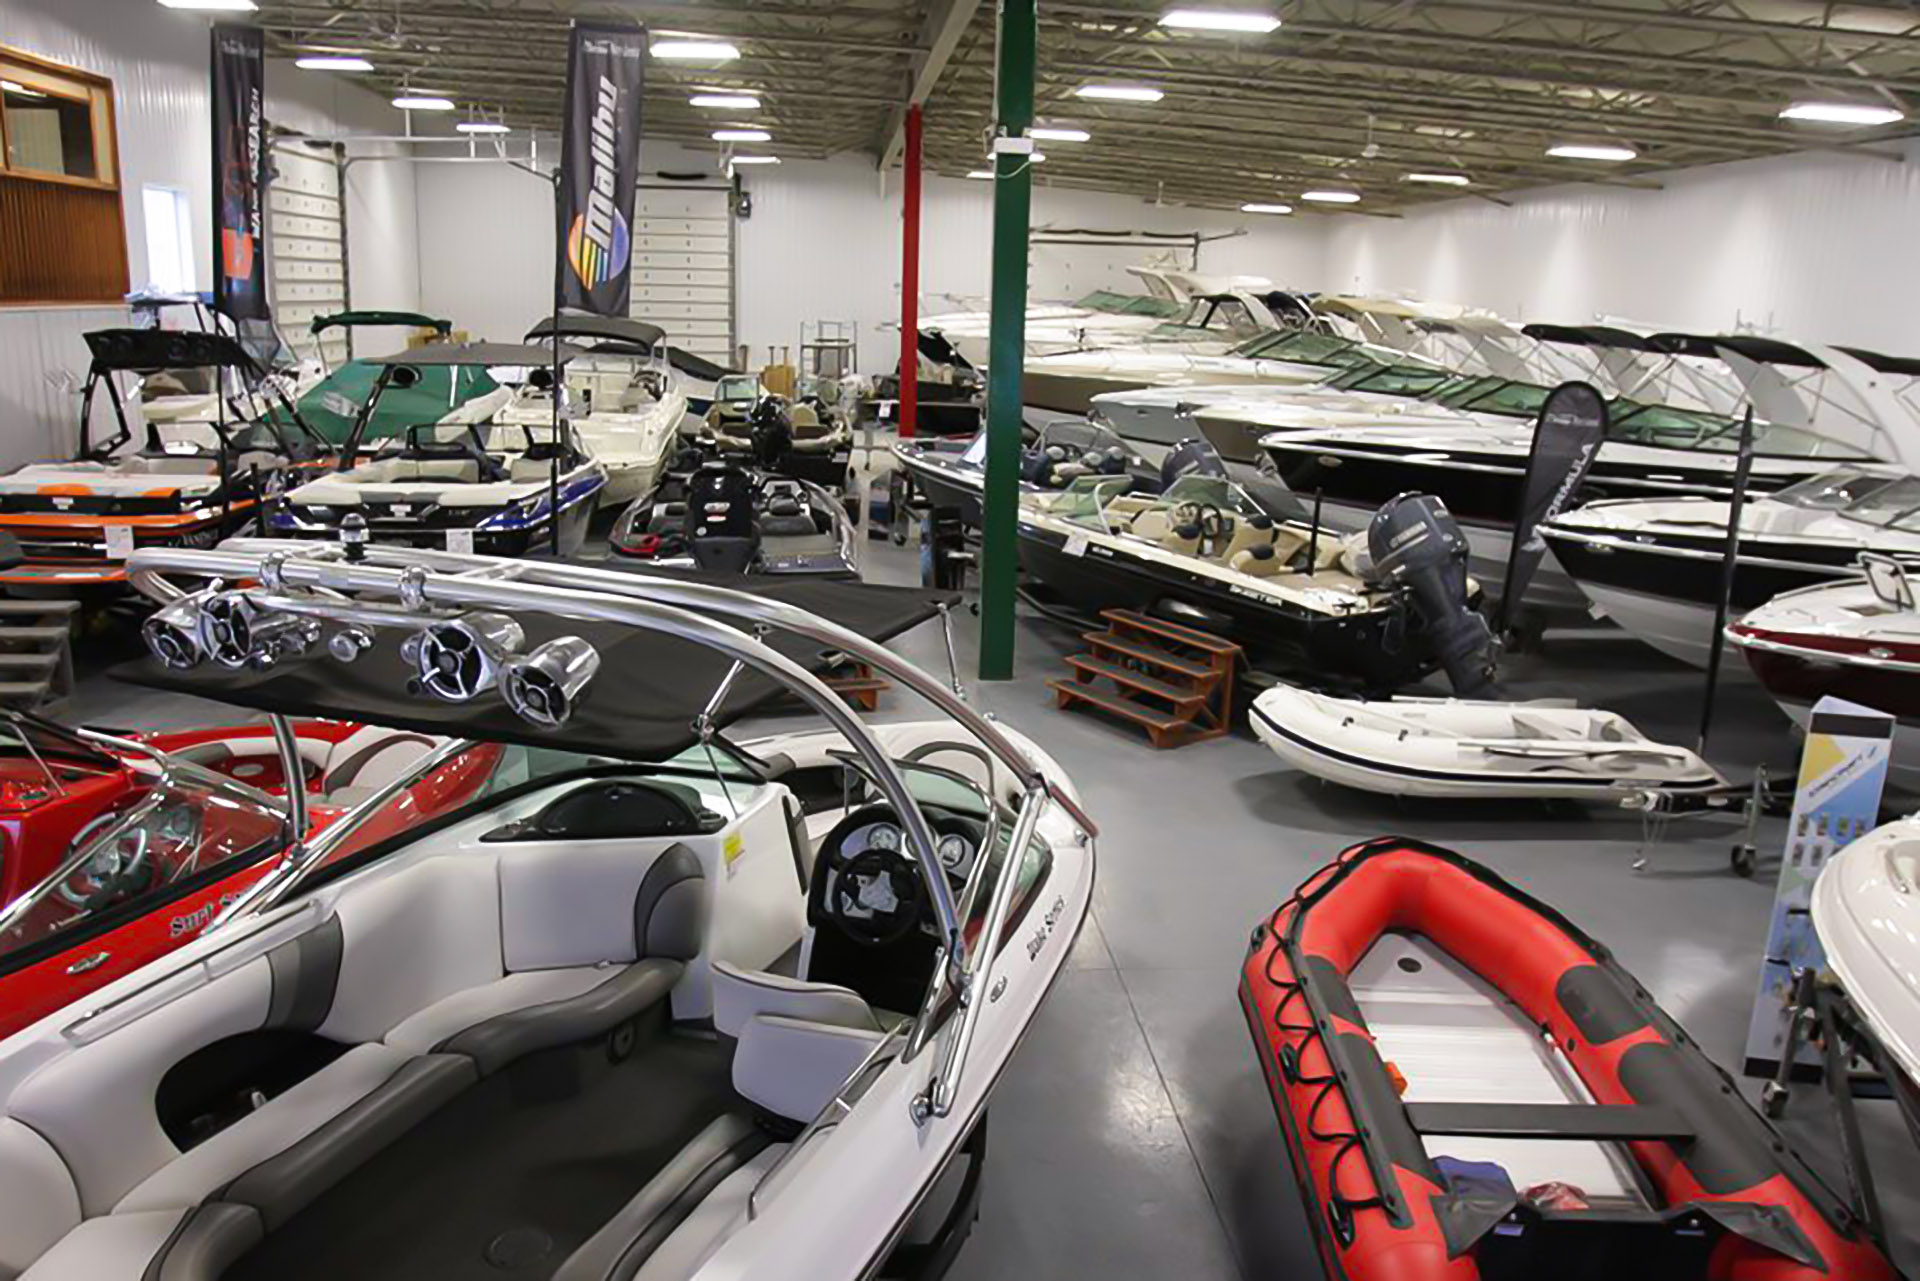 Sale of new and used boats